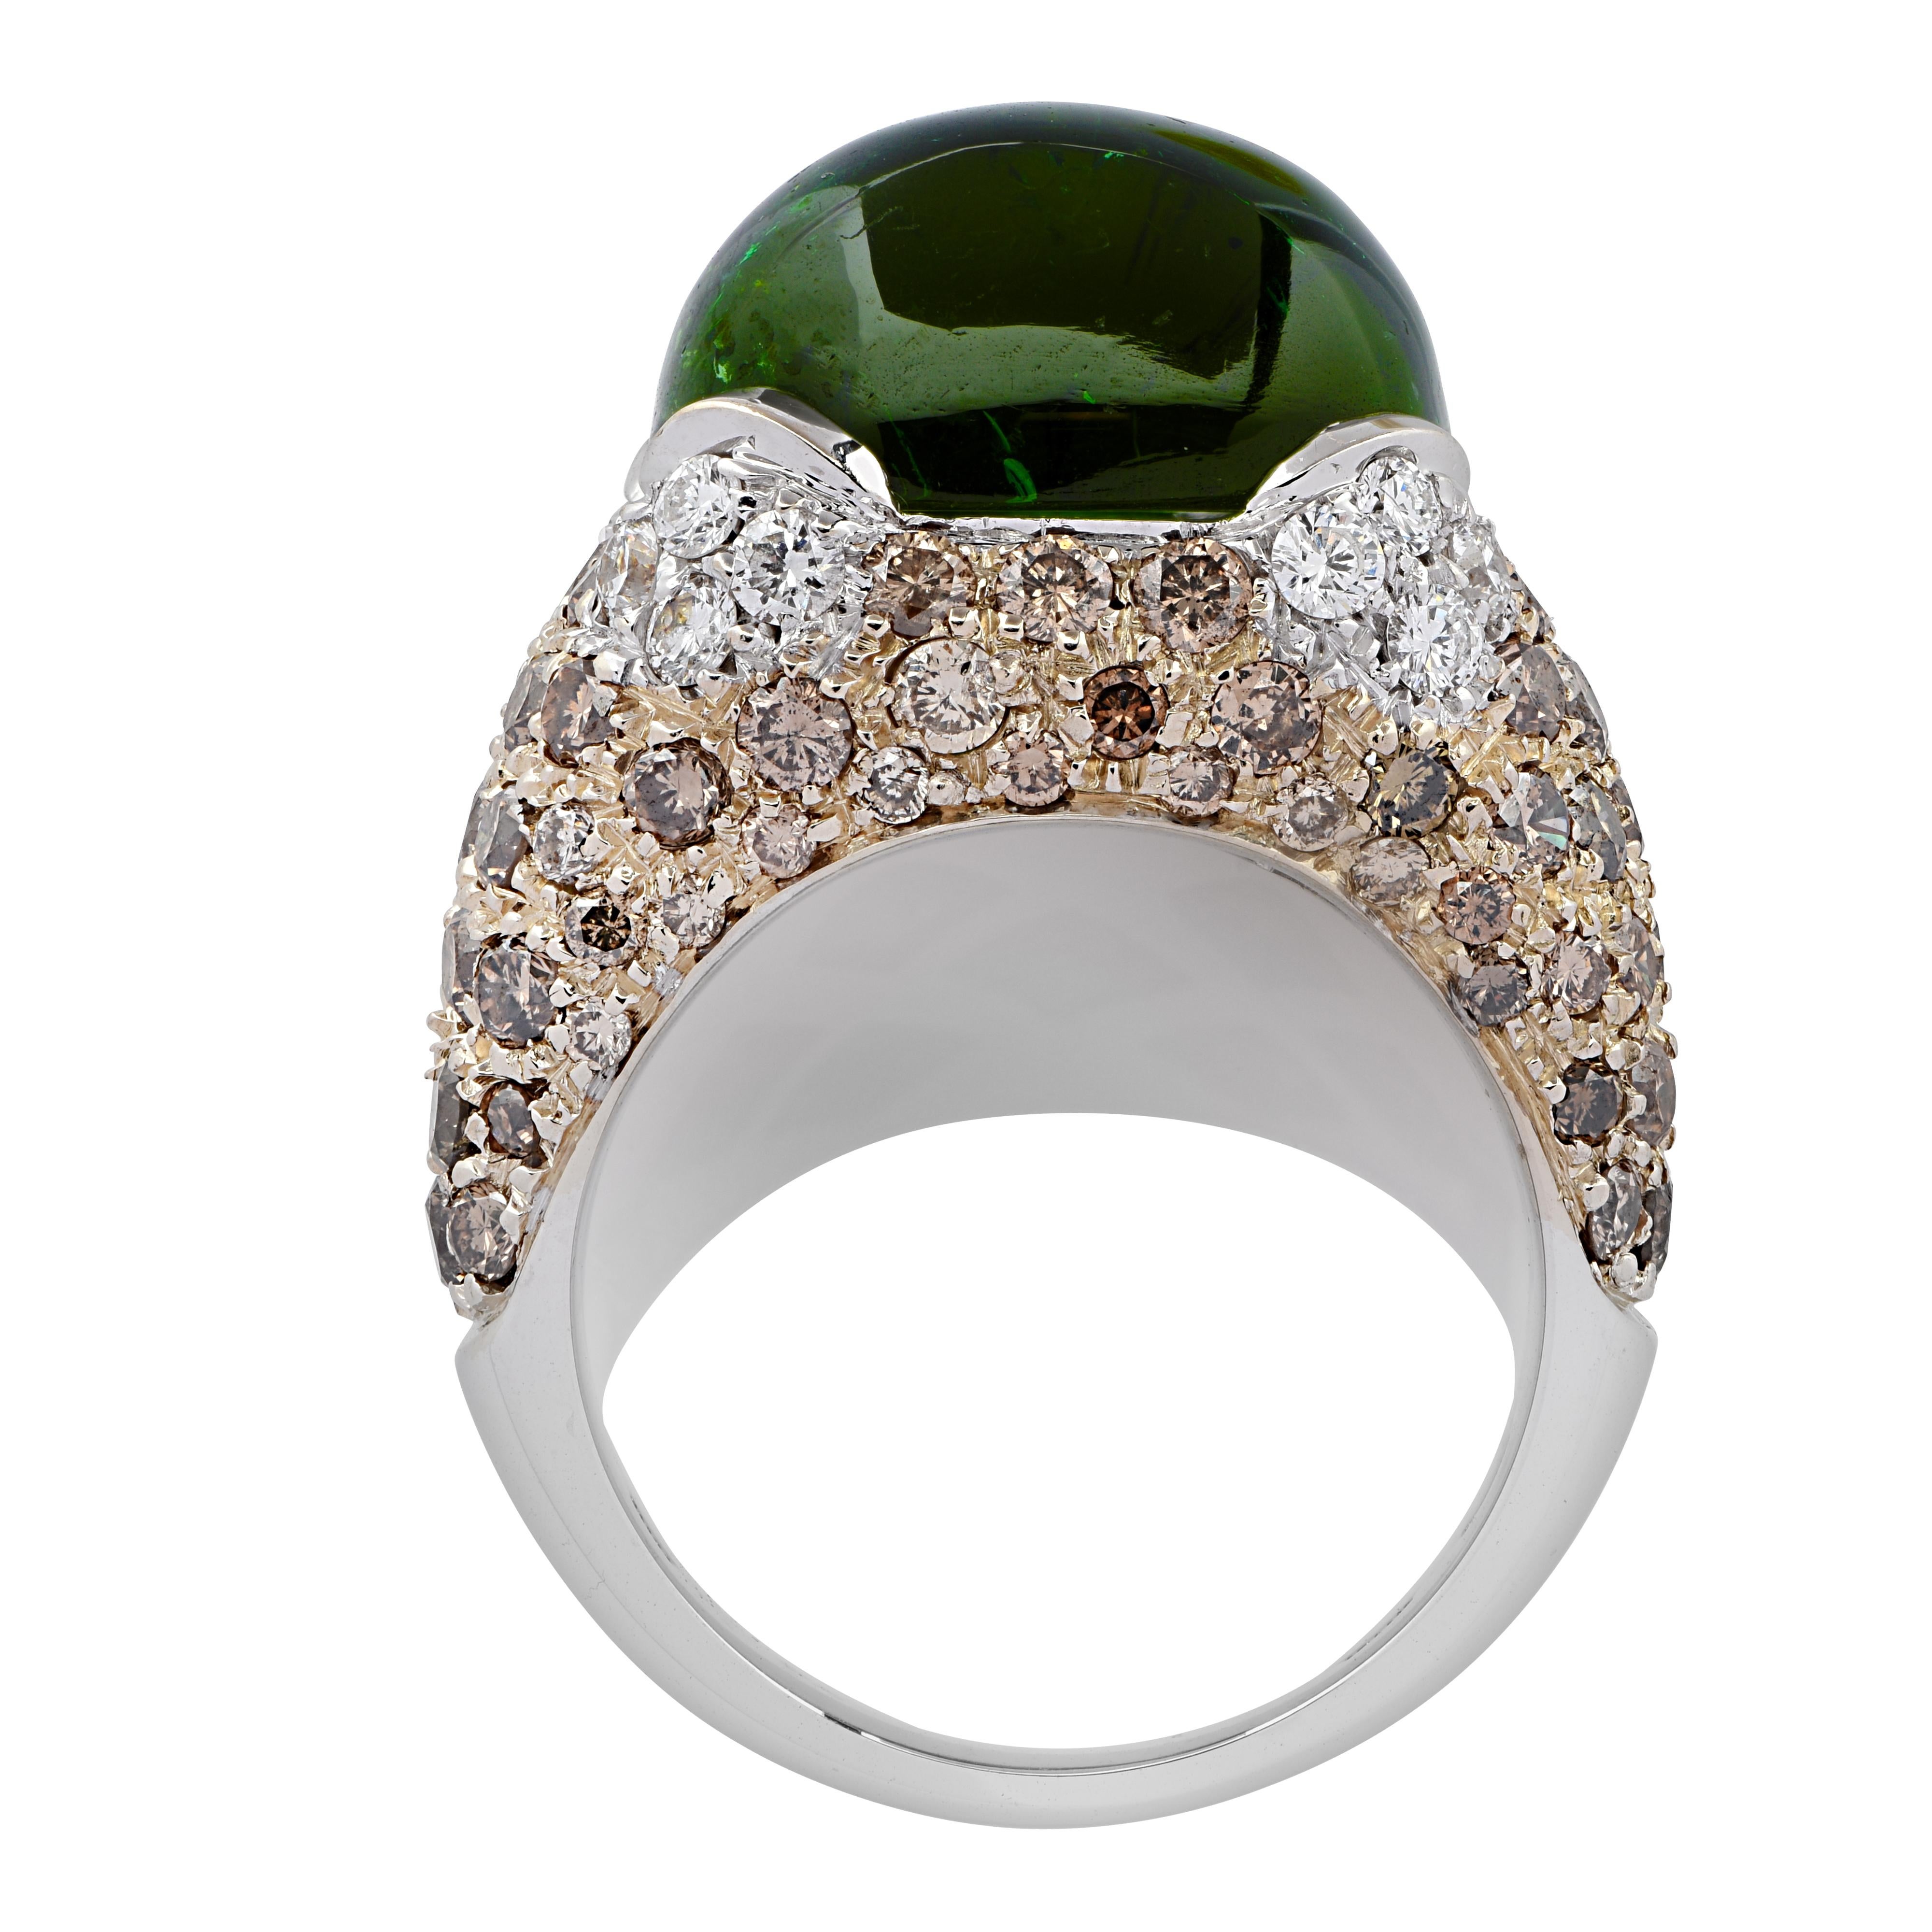 Spectacular ring crafted in white and yellow gold showcasing a gorgeous cabochon cut green Tourmaline accented by approximately .90 carats of round brilliant cut brown diamonds, and G color diamonds, VS clarity. The Tourmaline rests on a bed of